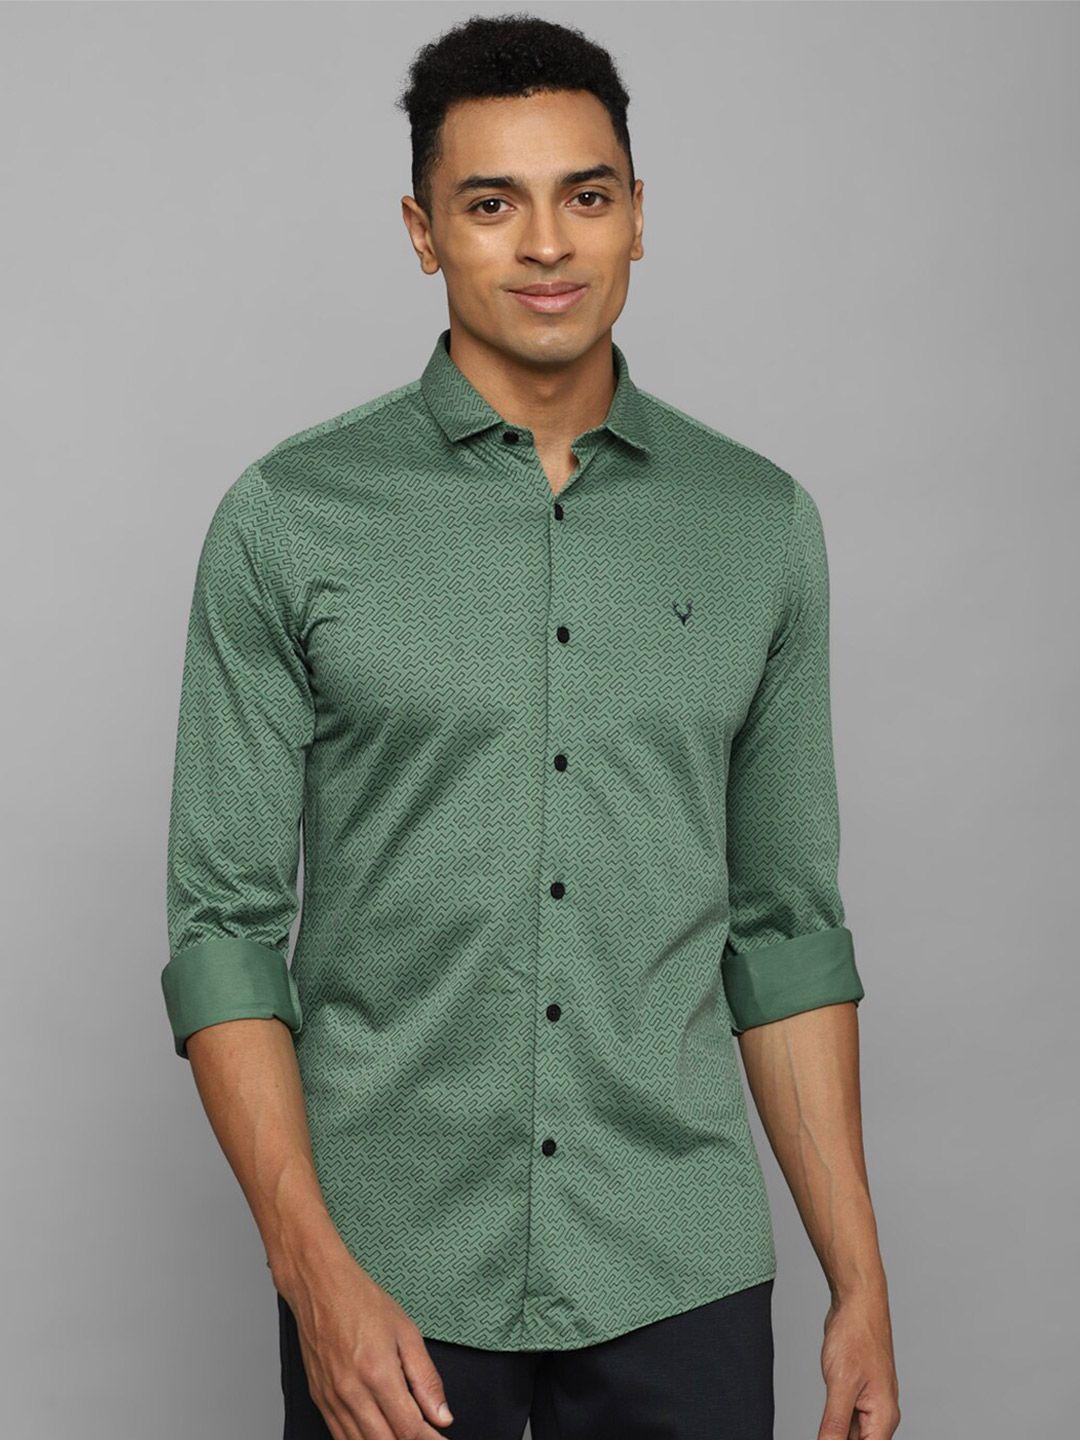 allen-solly-slim-fit-opaque-geometric-printed-pure-cotton-casual-shirt